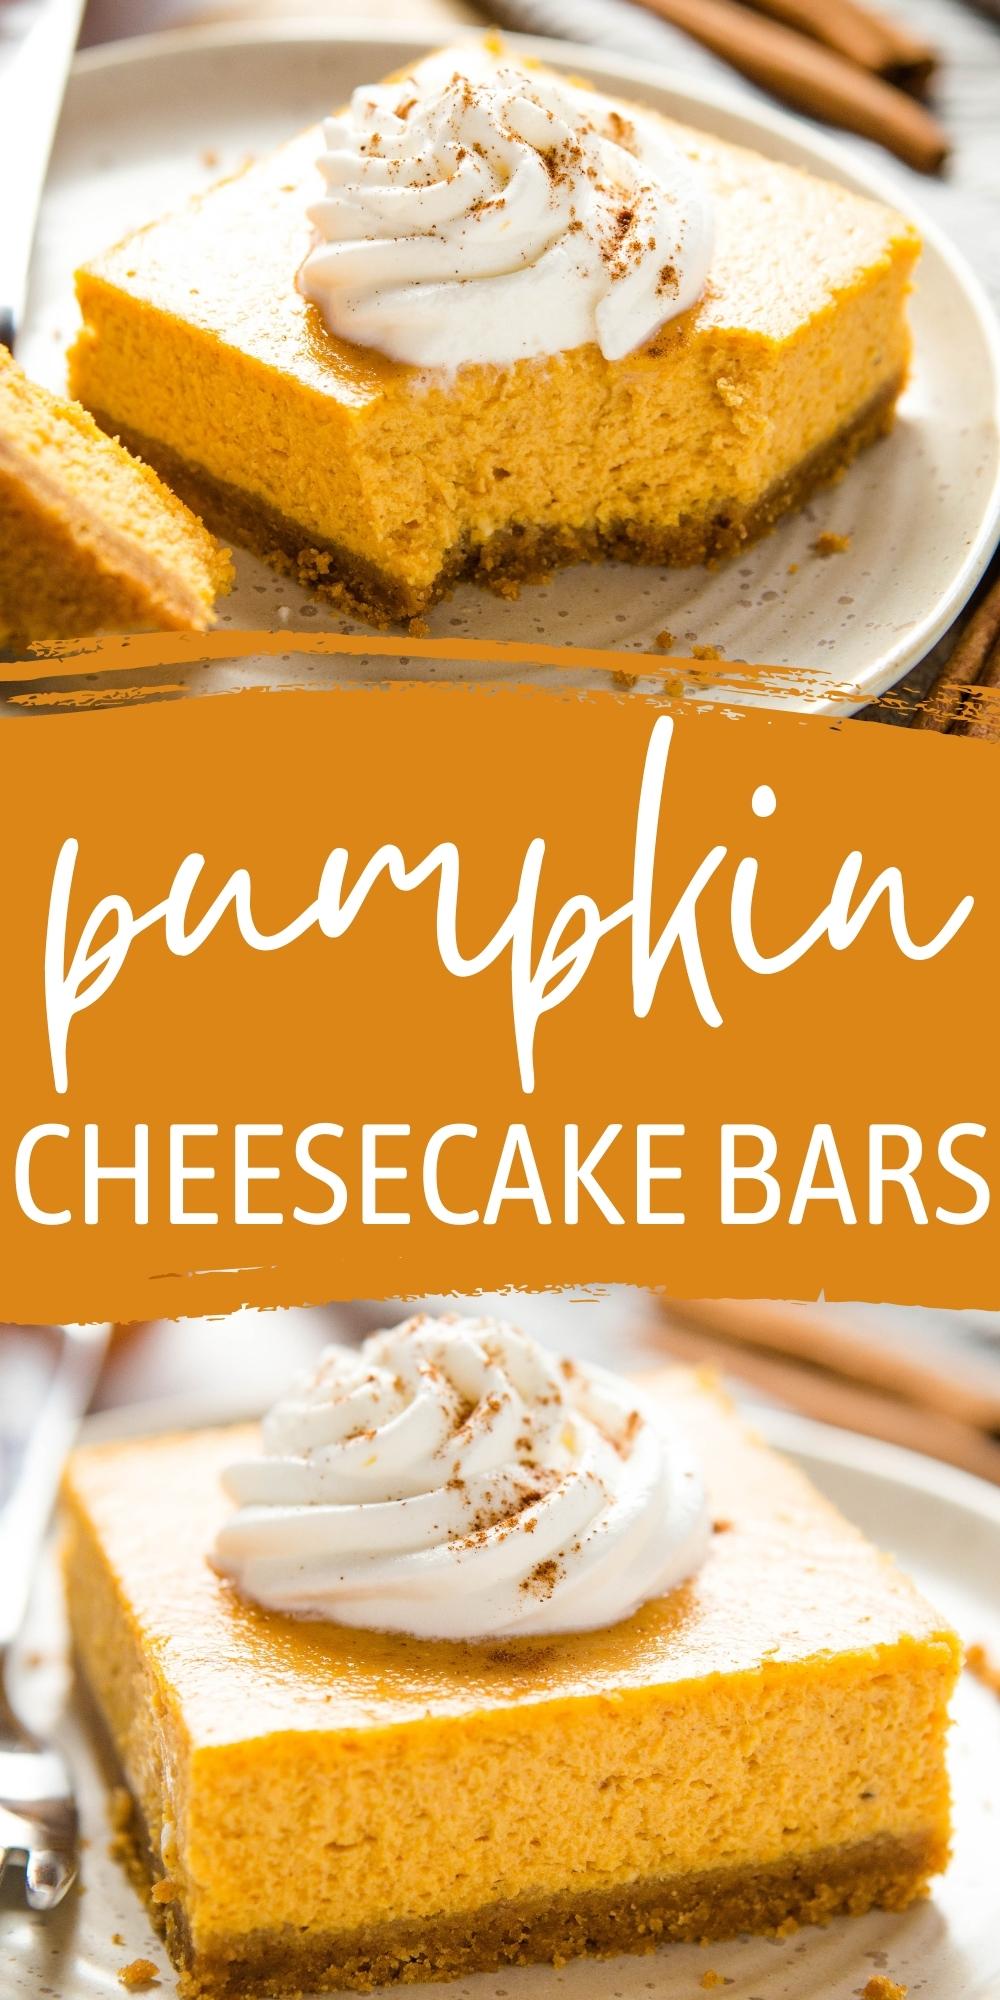 These Pumpkin Cheesecake Bars are the perfect easy-to-make fall dessert - ultra creamy and packed with pumpkin spice flavours! Recipe from thebusybaker.ca! #pumpkincheesecakebars #pumpkinrecipe #pumpkin #fallcheesecake #fallbaking #fall #pumpkincheesecake #pumpkinspice via @busybakerblog